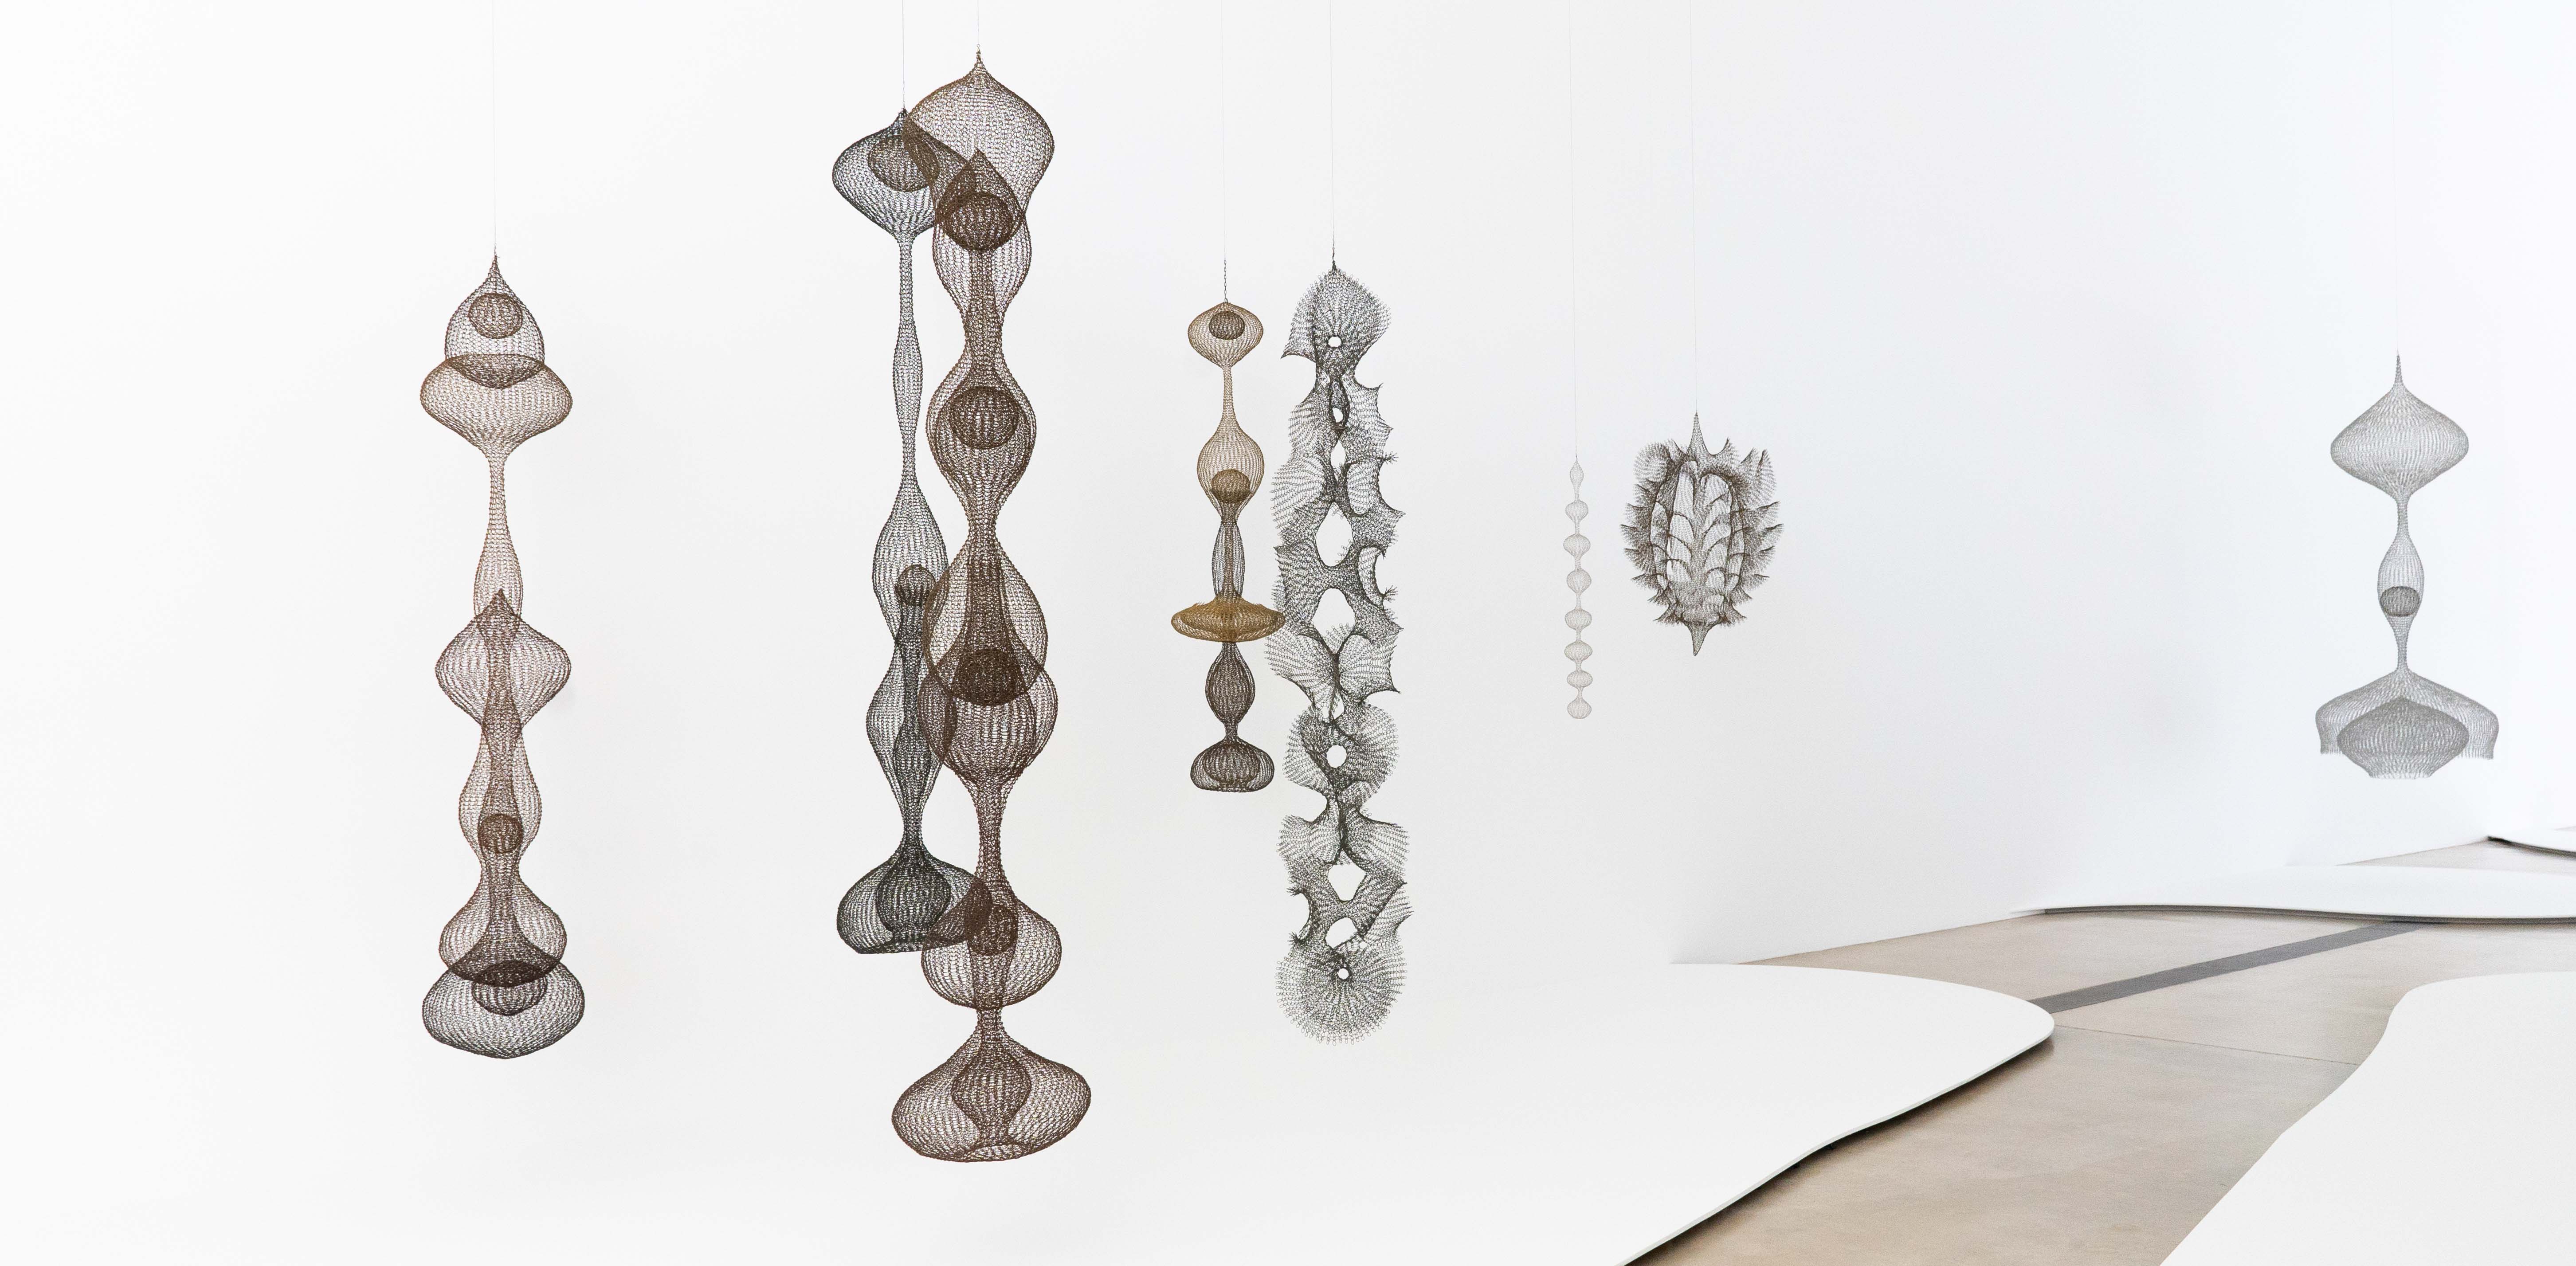 A view of Ruth Asawa's hanging wire sculptures in the Main Gallery.